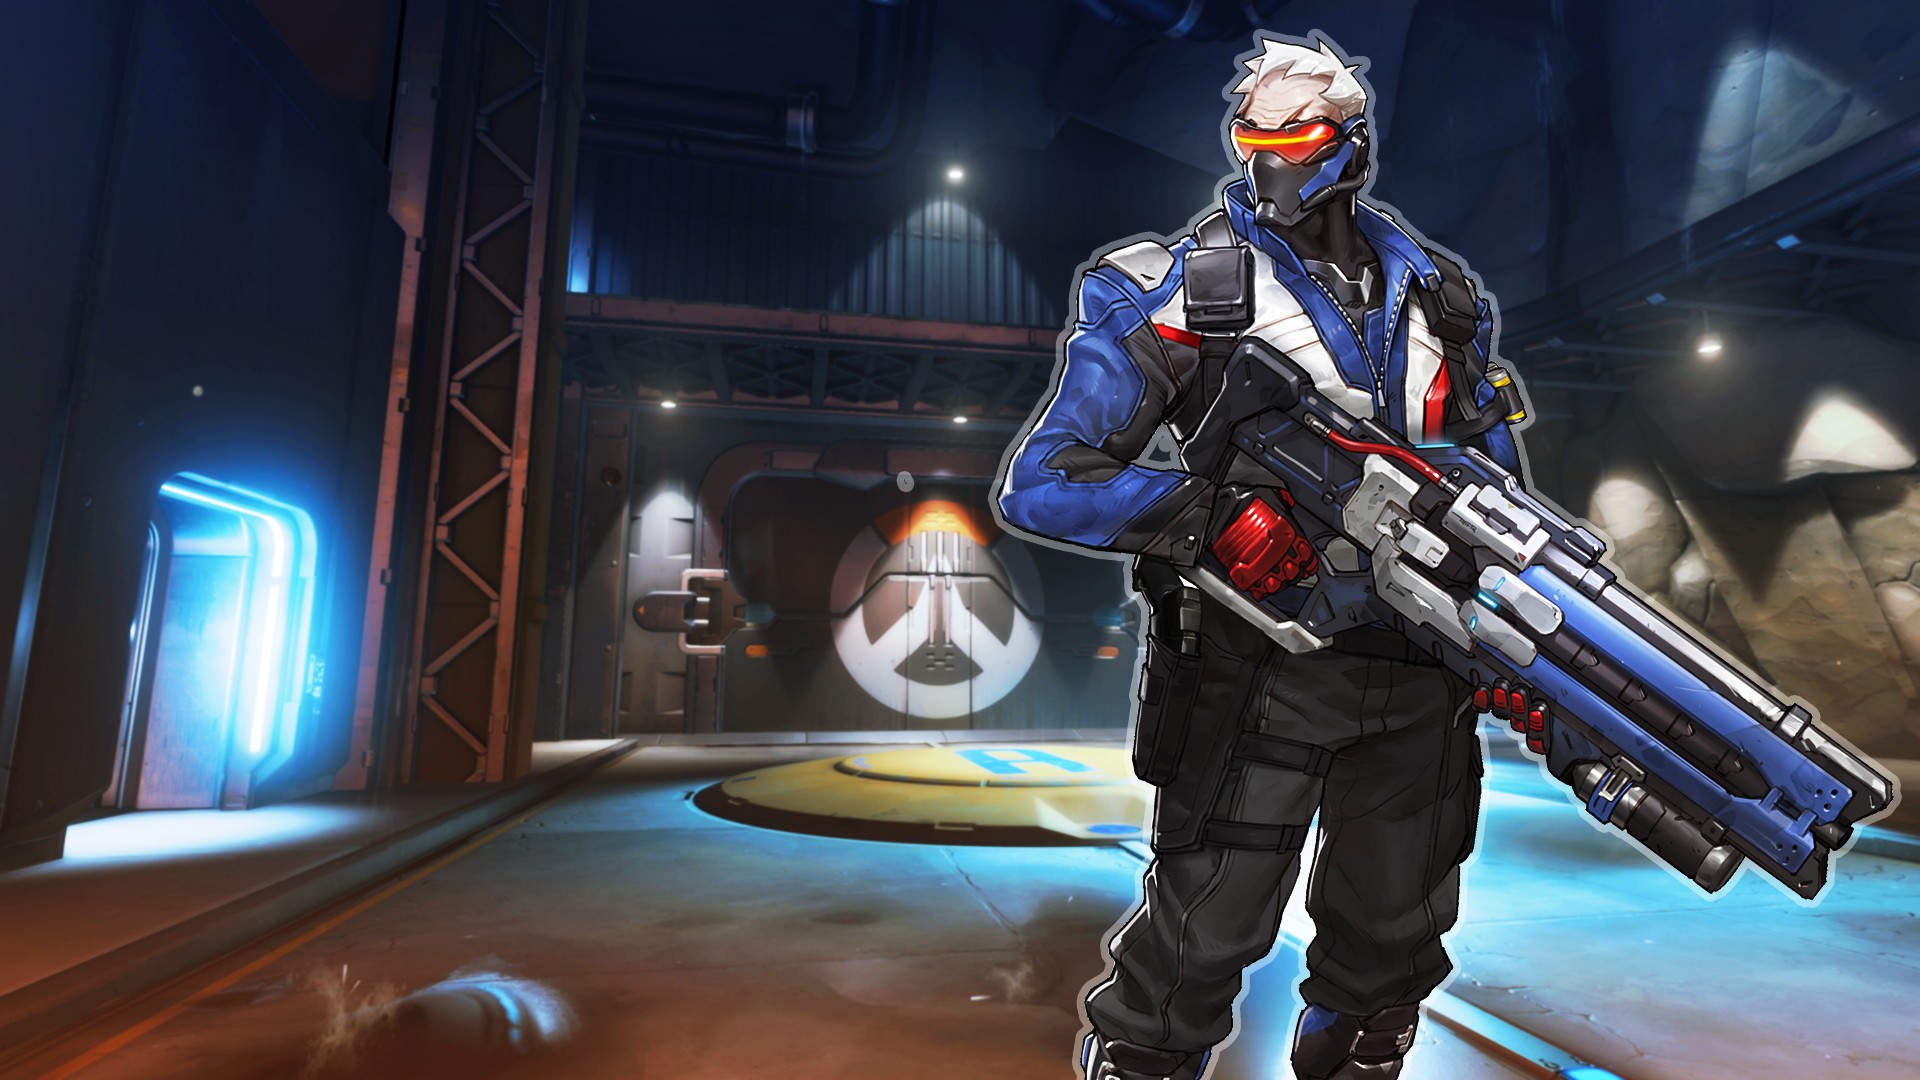 General 1920x1080 Overwatch Blizzard Entertainment video games livewirehd (Author) Soldier: 76 (Overwatch) PC gaming